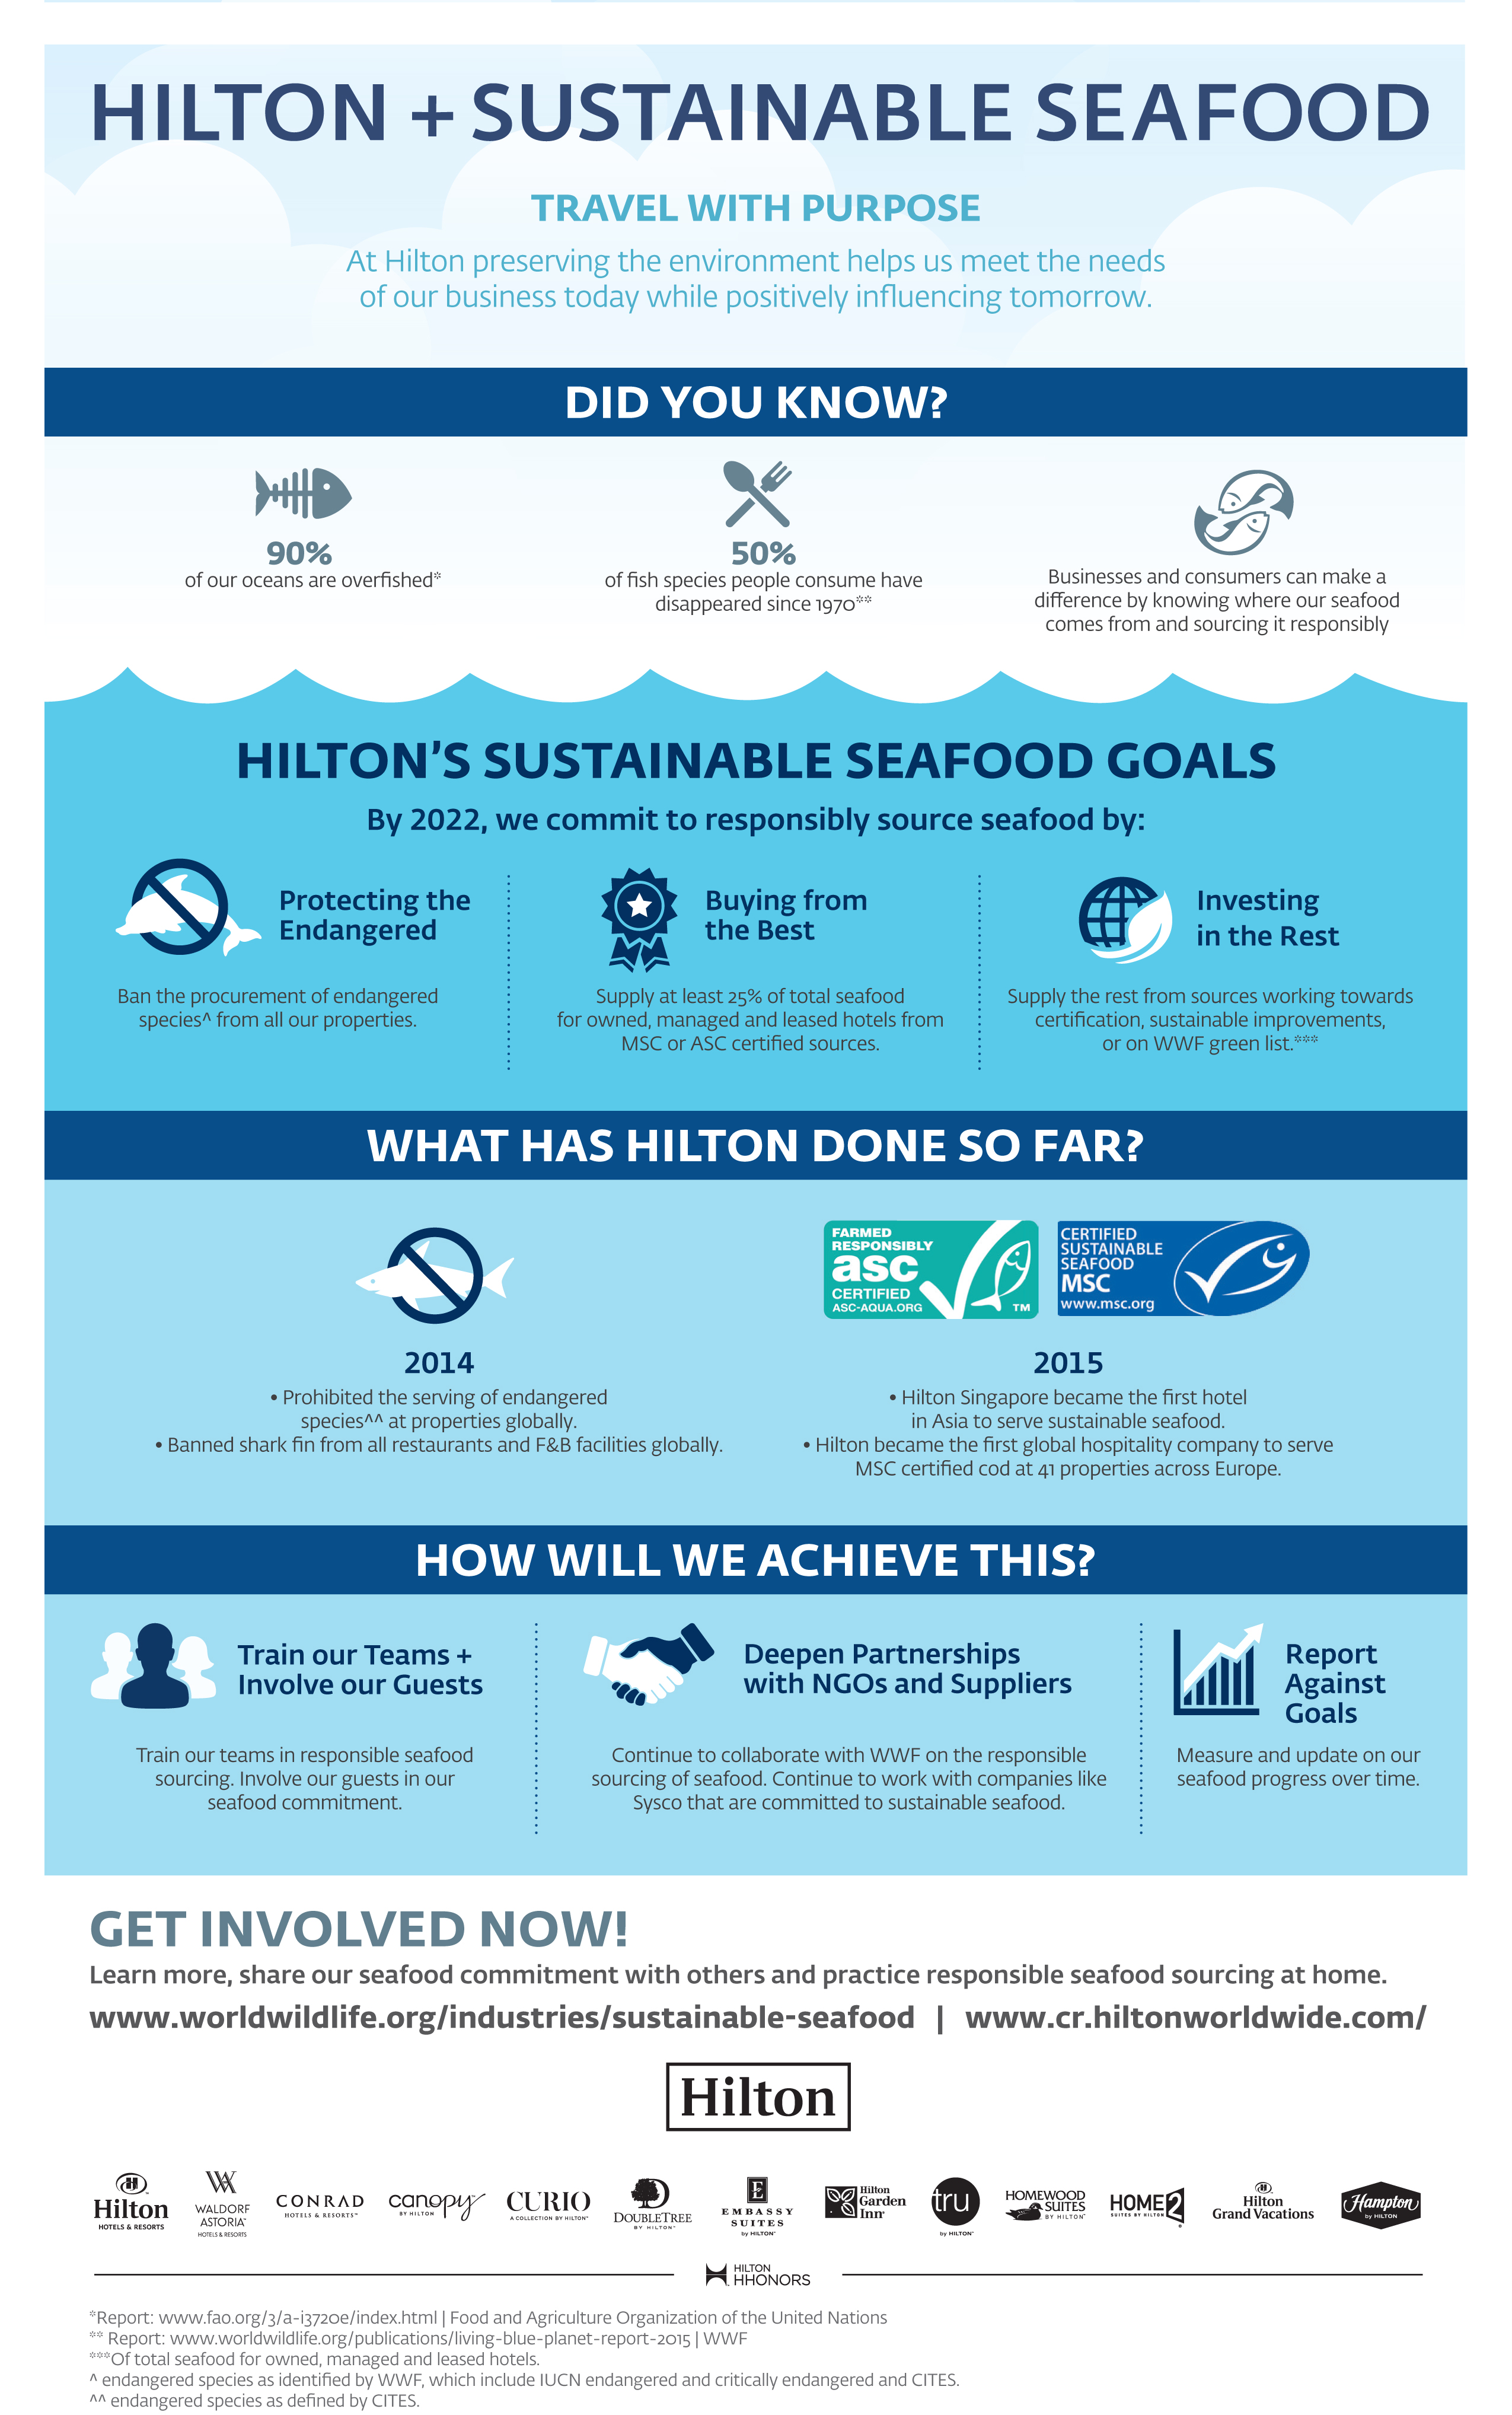 Hilton’s sustainable seafood goals will comprise the global ban of procurement of endangered species as identified by WWF, and the transition of its seafood purchasing to sustainable and responsible sources. Click on the graphic for an enlarged view. Source: Hilton.